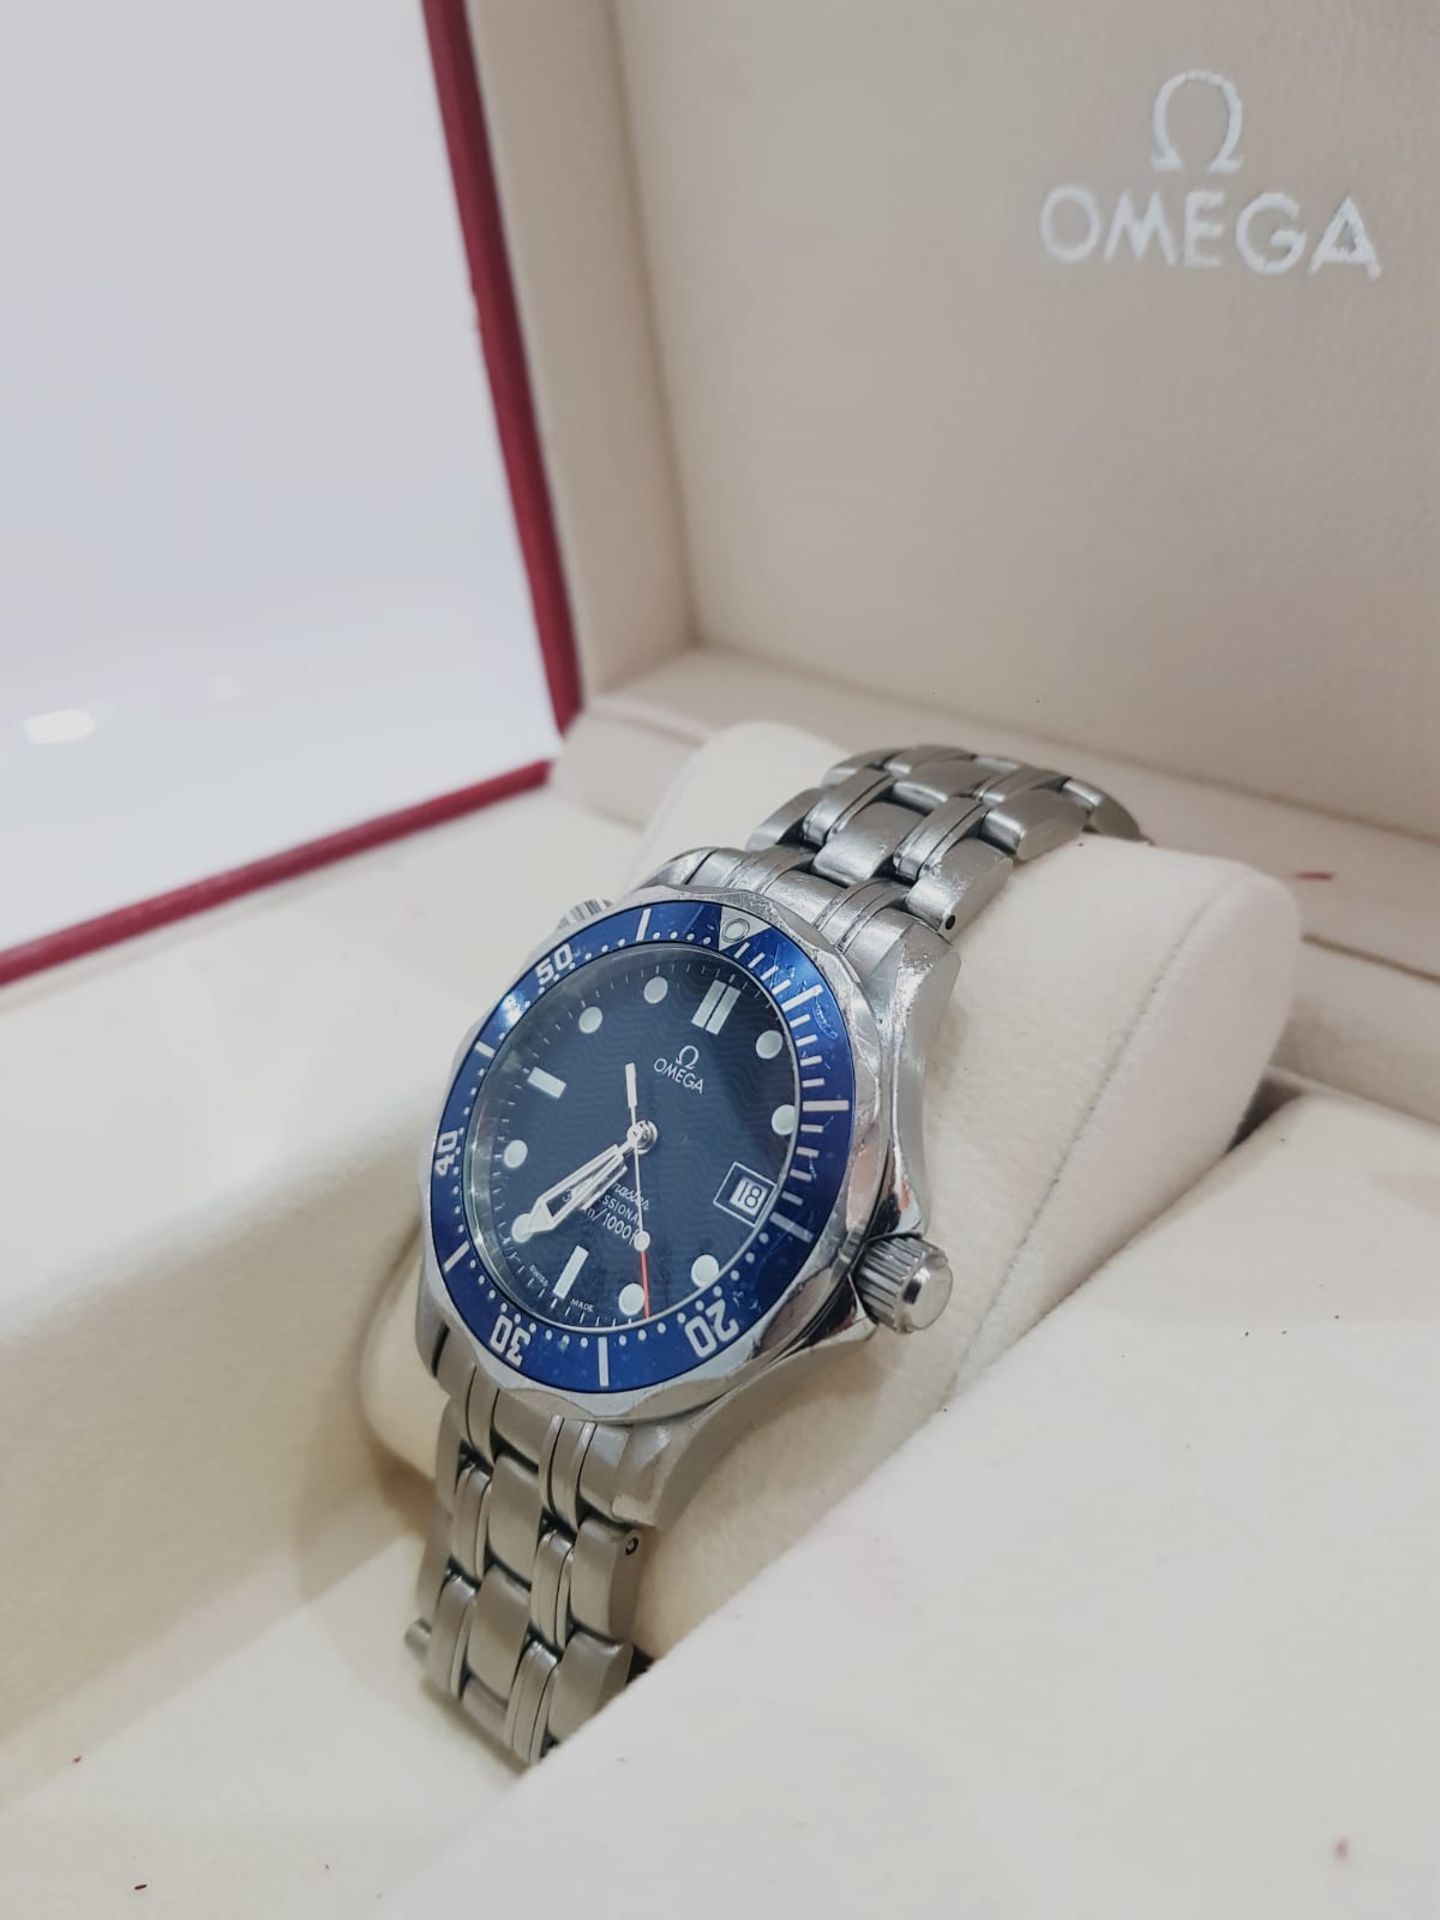 Omega Seamaster Professional 300m Mid Size James Bond Blue Wave Dial Mens Watch - Image 4 of 13